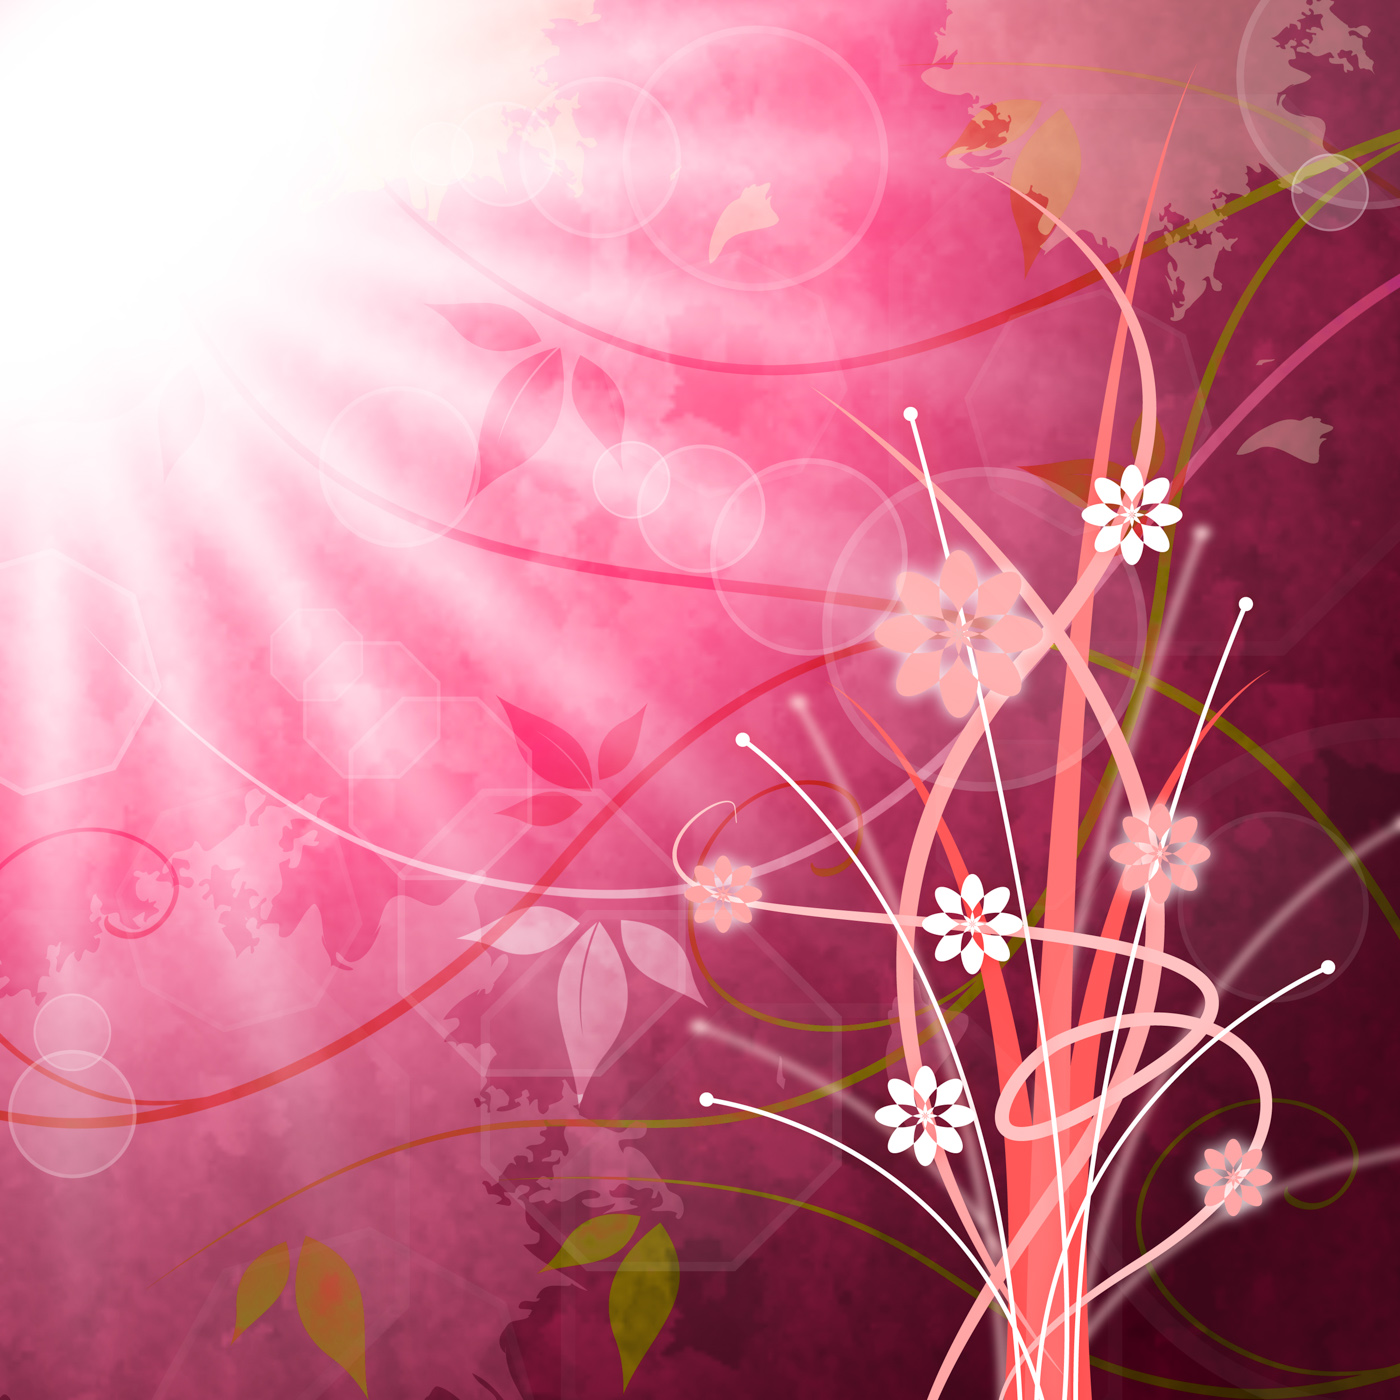 Sun rays means flower flowers and pink photo